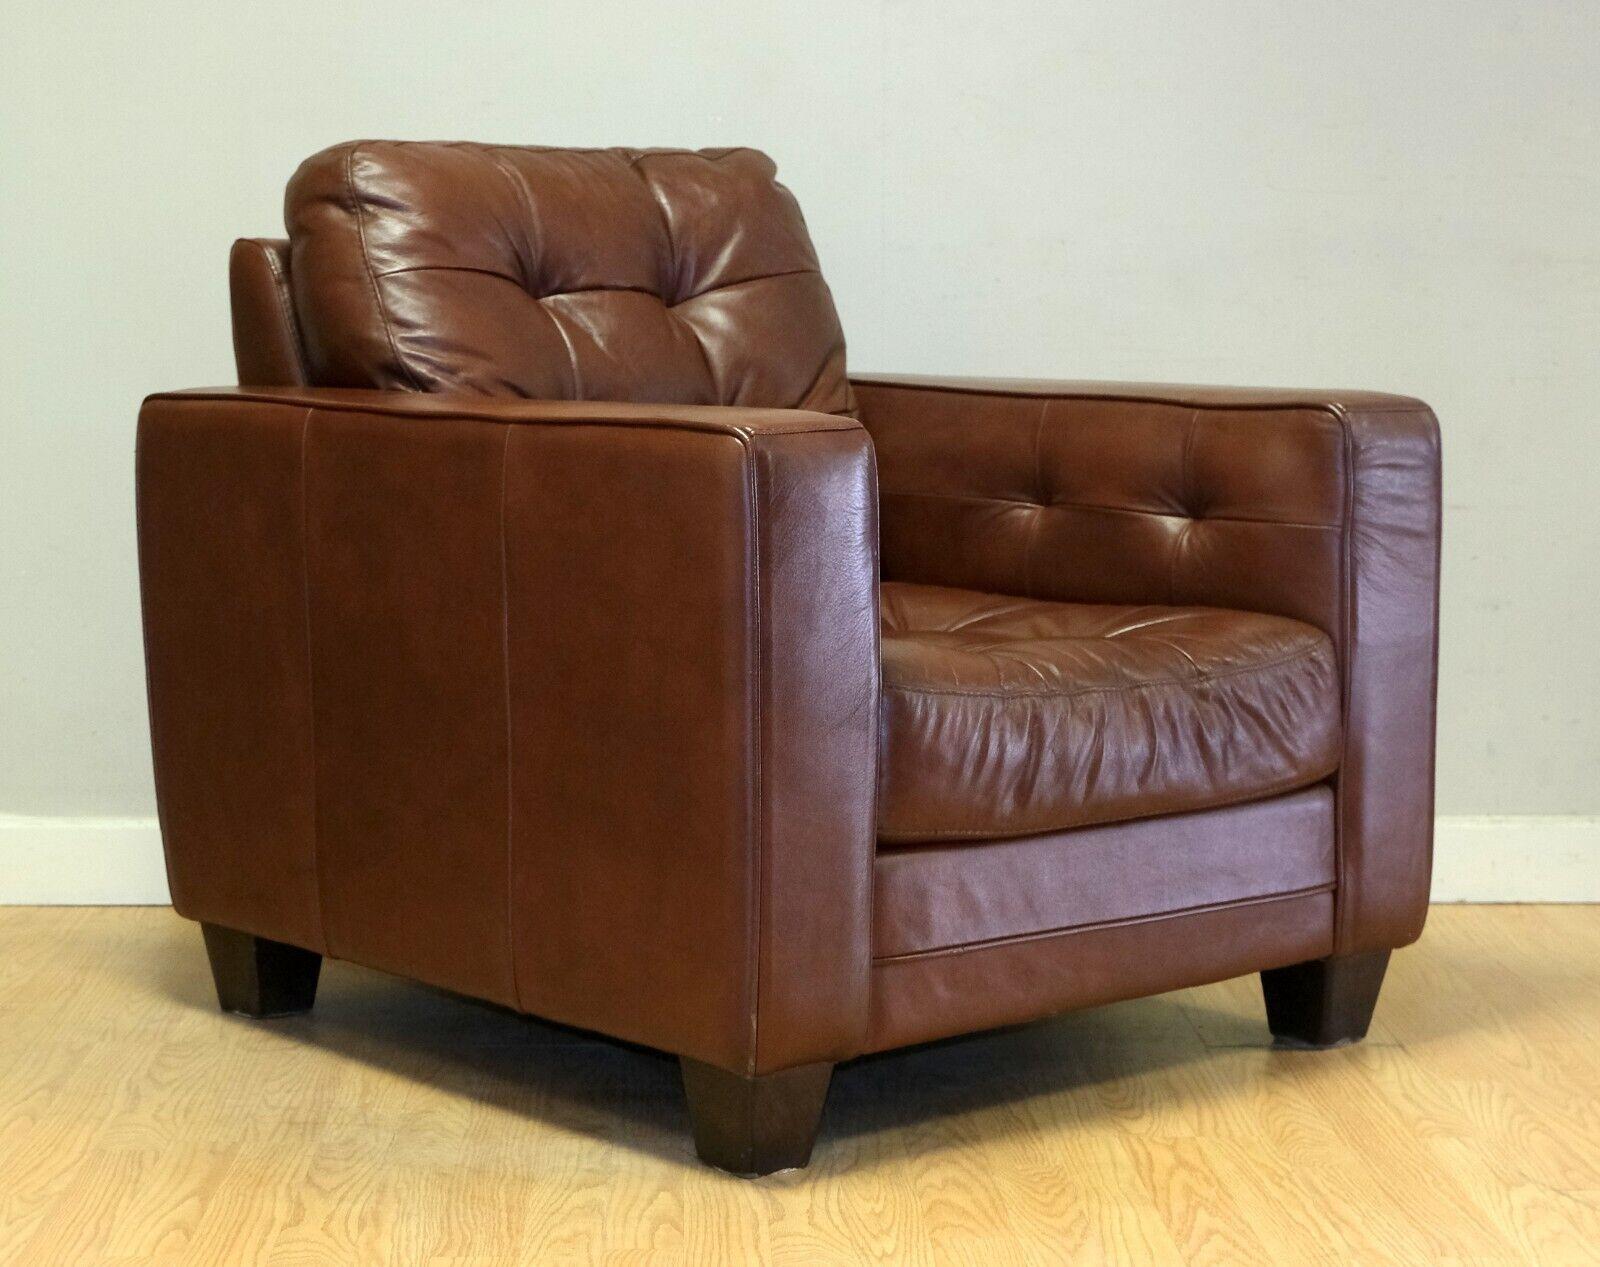 English AGED KNOLL STYLE BROWN LEATHER ARMCHAIR CHESTERFIELD STYLE BUTTONING TRACK ARMs For Sale